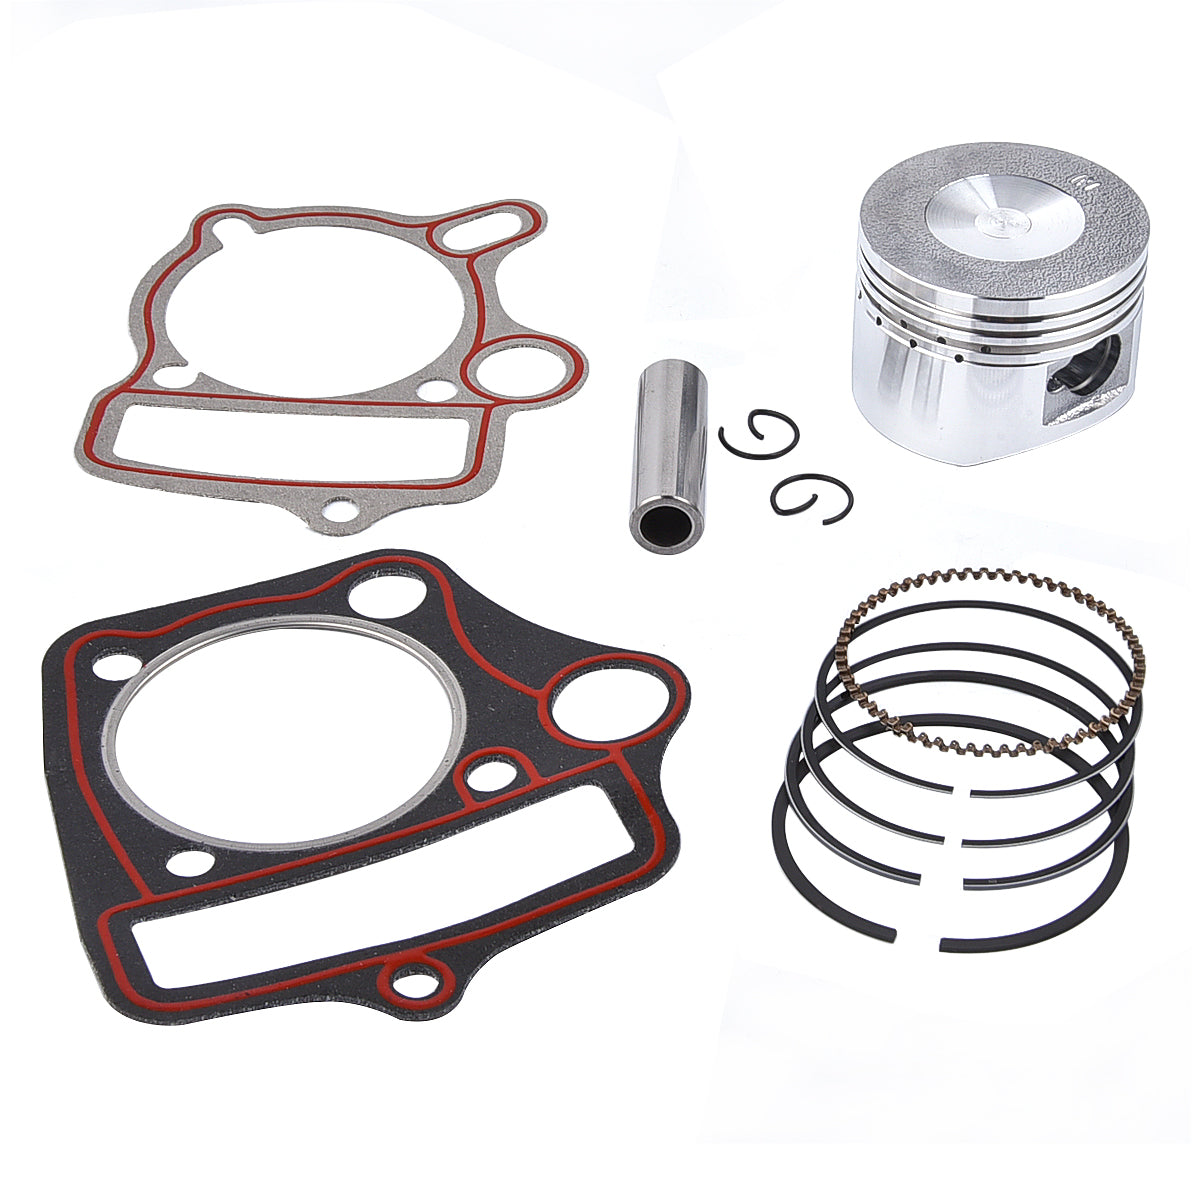 110cc Top End Kit Piston Rings and Gaskets